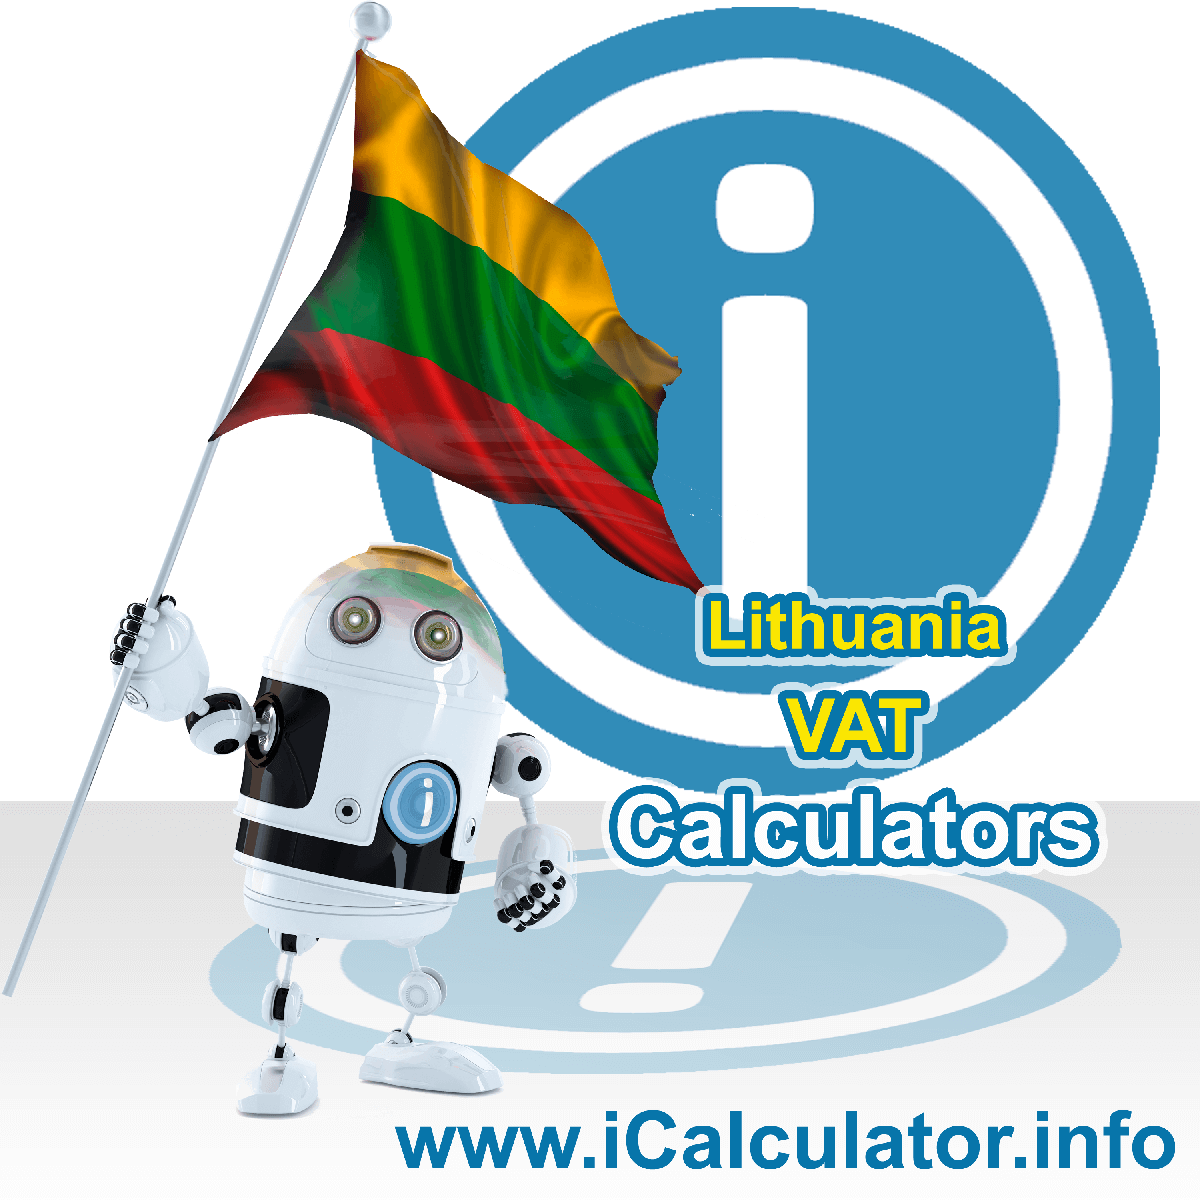 Lithuania VAT Calculator. This image shows the Lithuania flag and information relating to the VAT formula used for calculating Value Added Tax in Lithuania using the Lithuania VAT Calculator in 2023